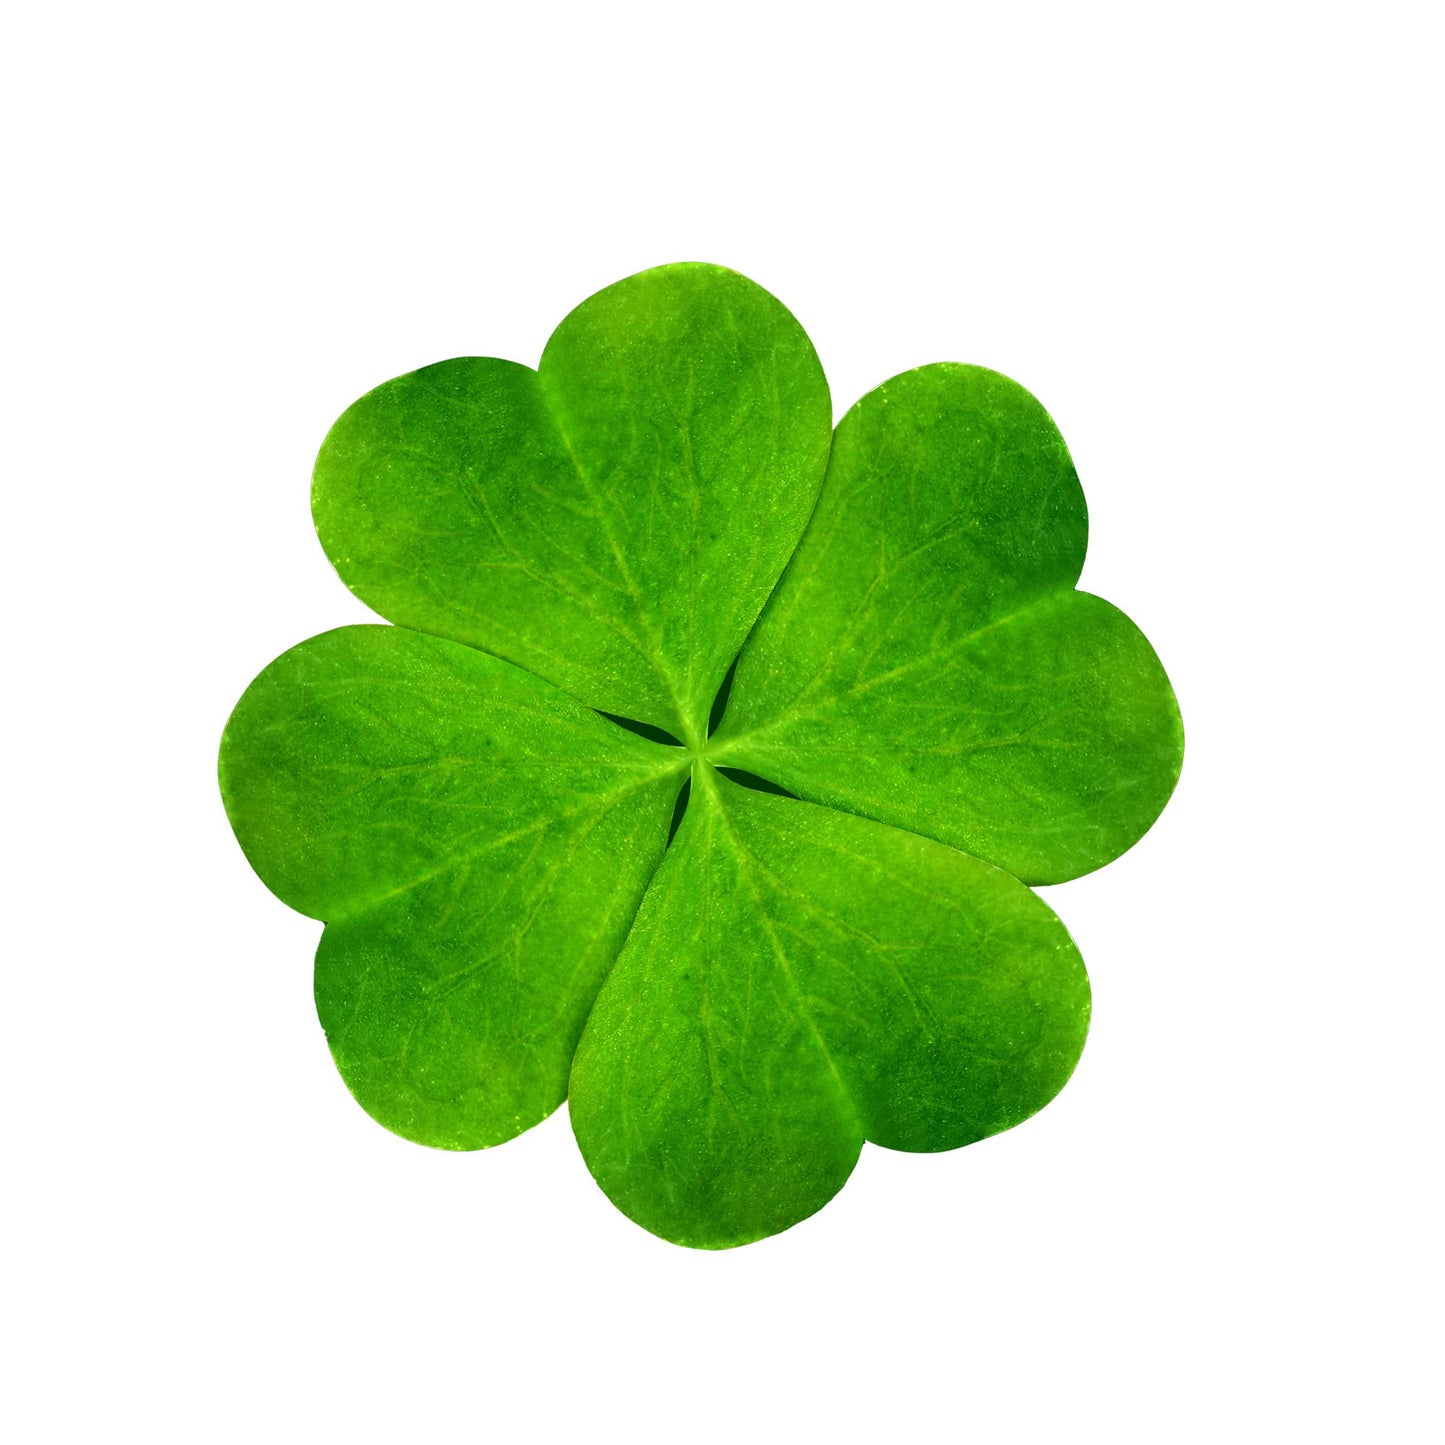 Microfiber Cleaning Cloth That Looks Like A Four-Leaf Clover – Nerdwax